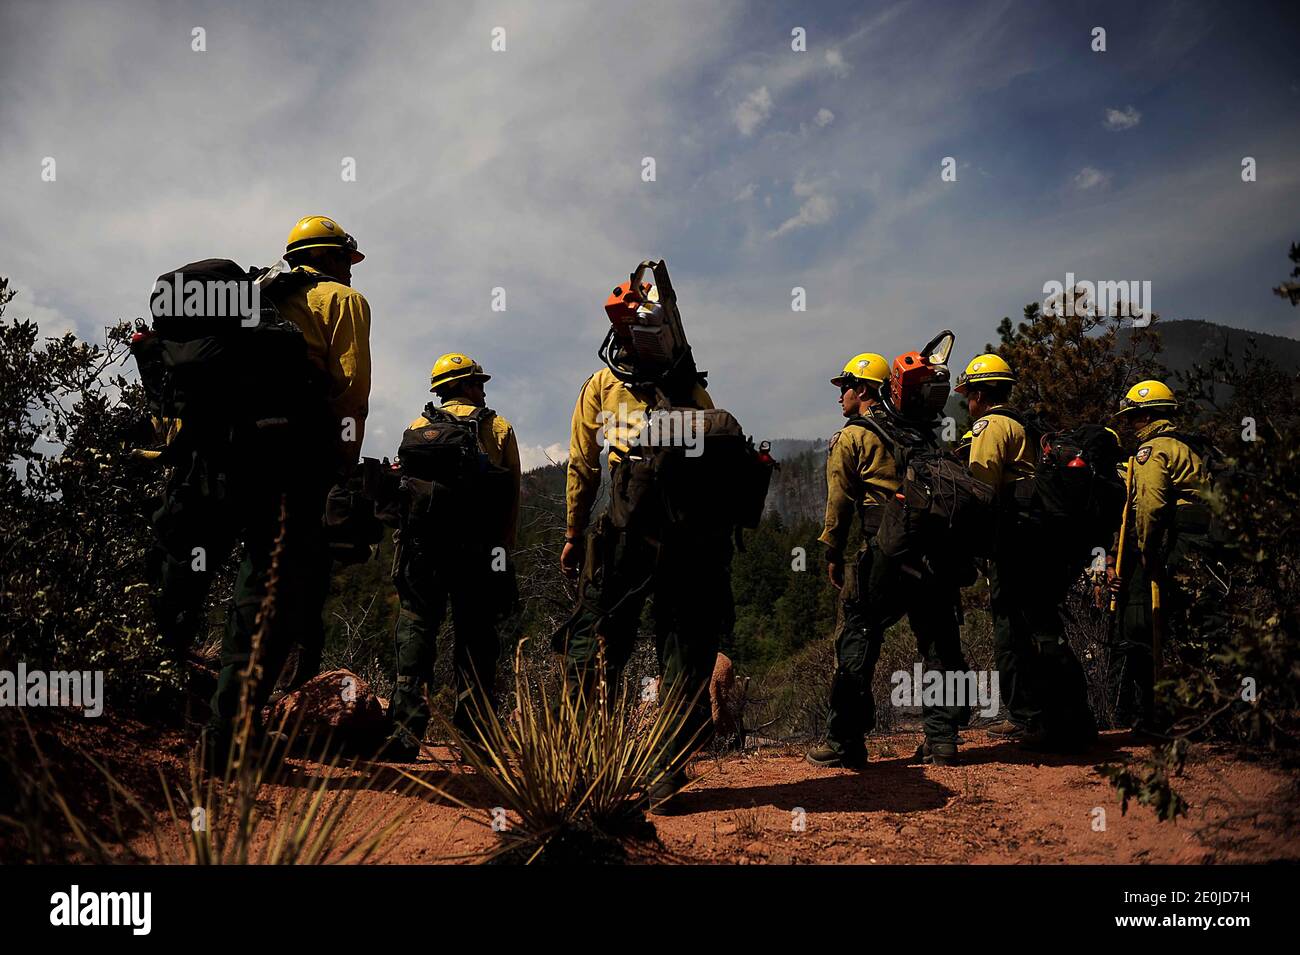 Vandenberg Air Force Base Hot Shot fire fighters prepare to cut a fire line on June 28, 2012 in the Mount Saint Francois area of Colorado Springs, Co. while helping to battle several fires in Waldo Canyon. The Waldo Canyon fire has grown to 18,500 acres and burned over 300 homes. Currently, more than 90 firefighters from the Academy, along with assets from Air Force Space Command; F.E. Warren Air Force Base, Wyo.; Fort Carson, Colo.; and the local community continue to fight the Waldo Canyon fire. Photo by U.S. Air Force via ABACAPRESS.COM Stock Photo